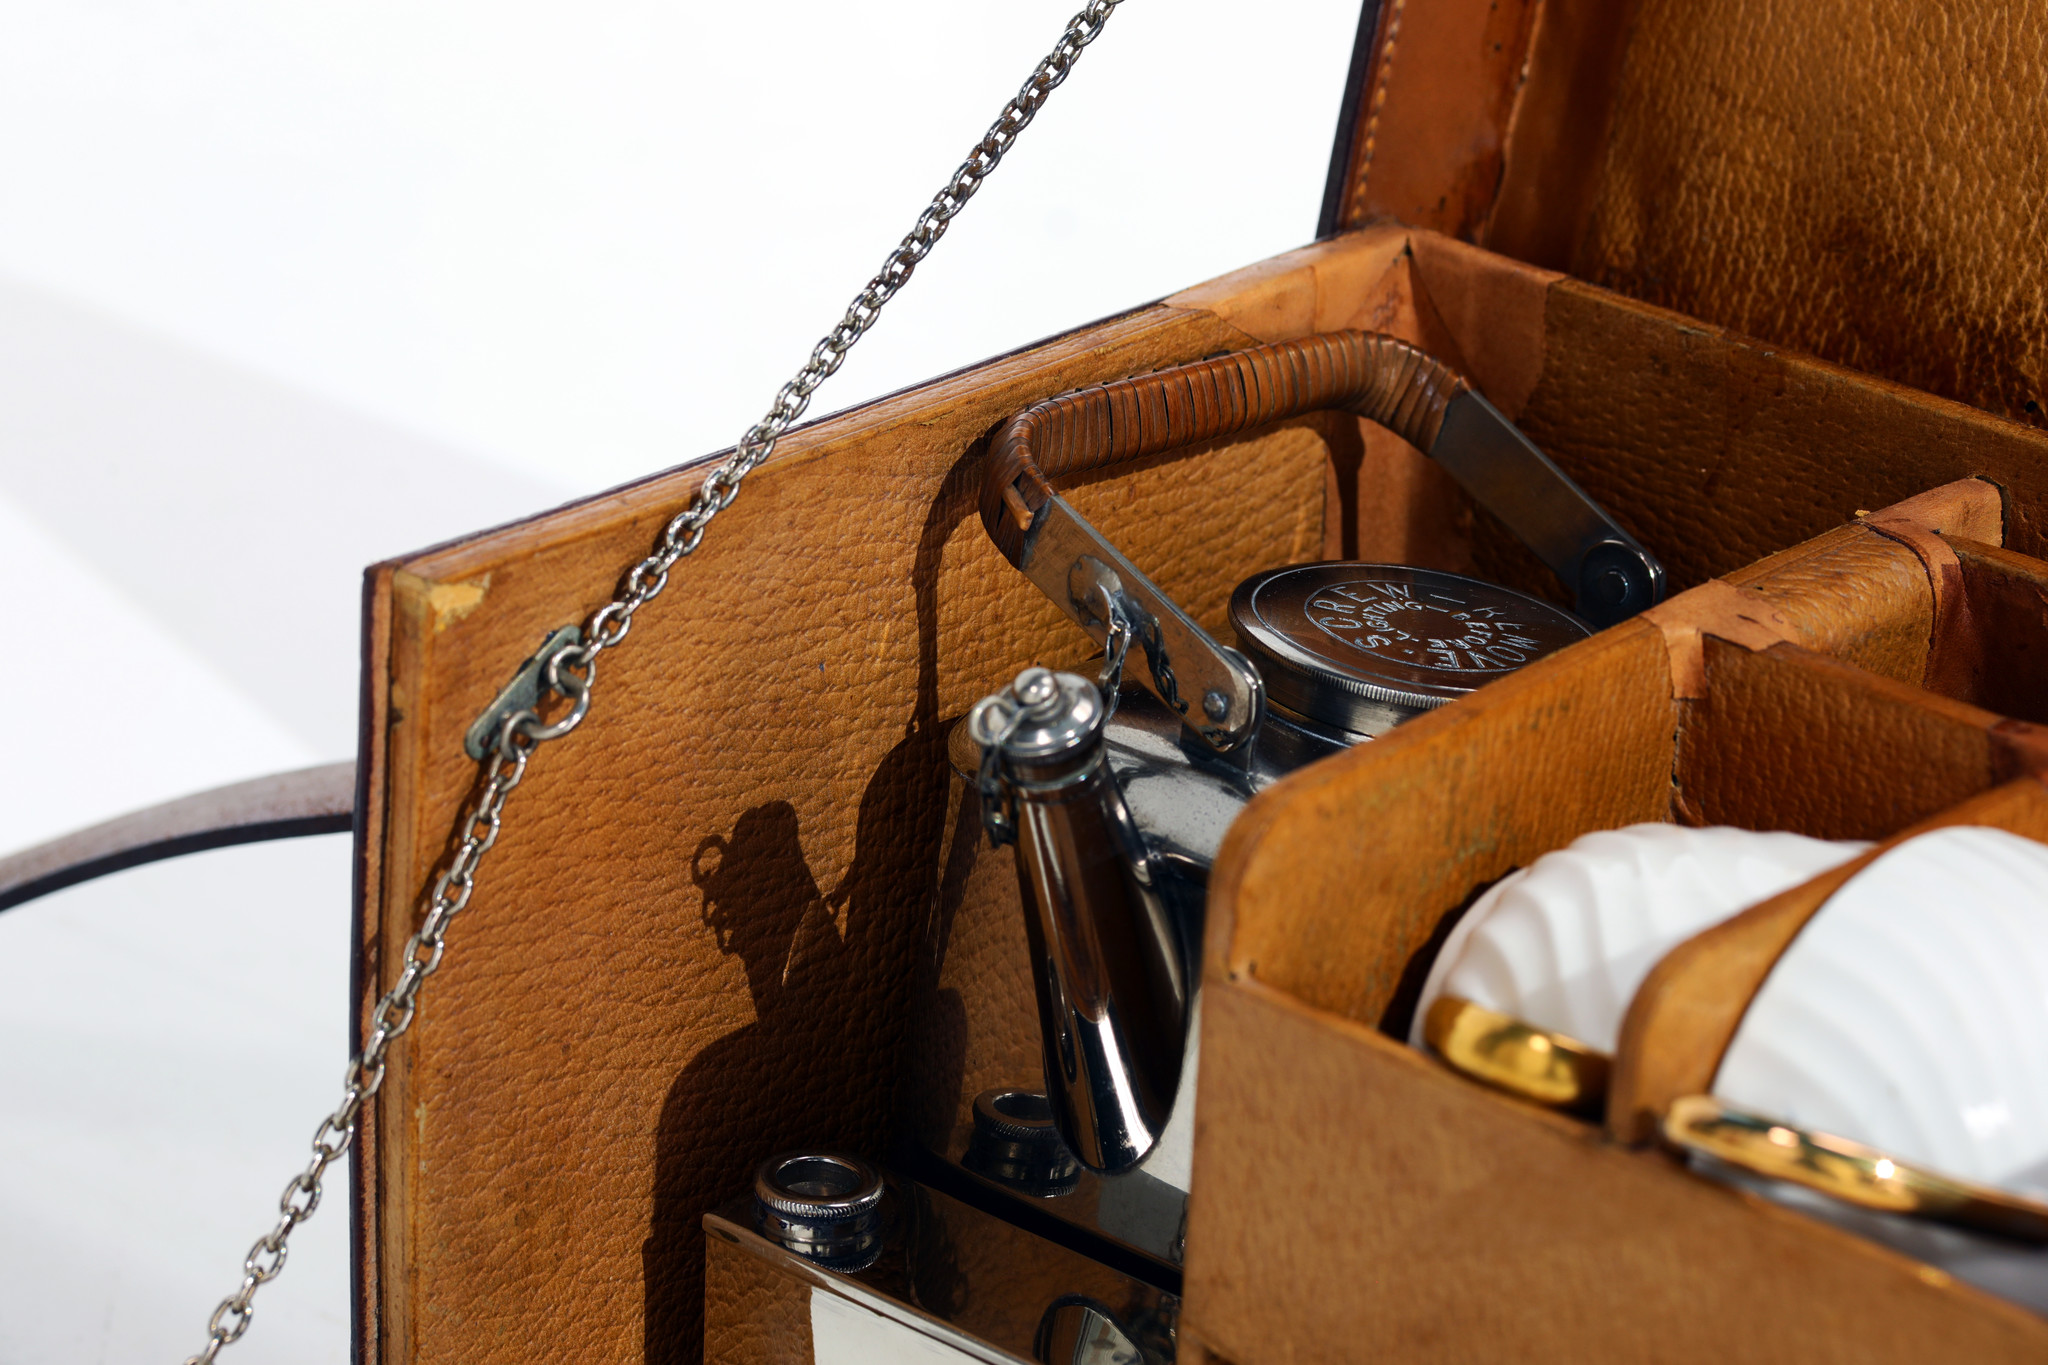 Exclusive Moynat picnic set in leather case circa 1910